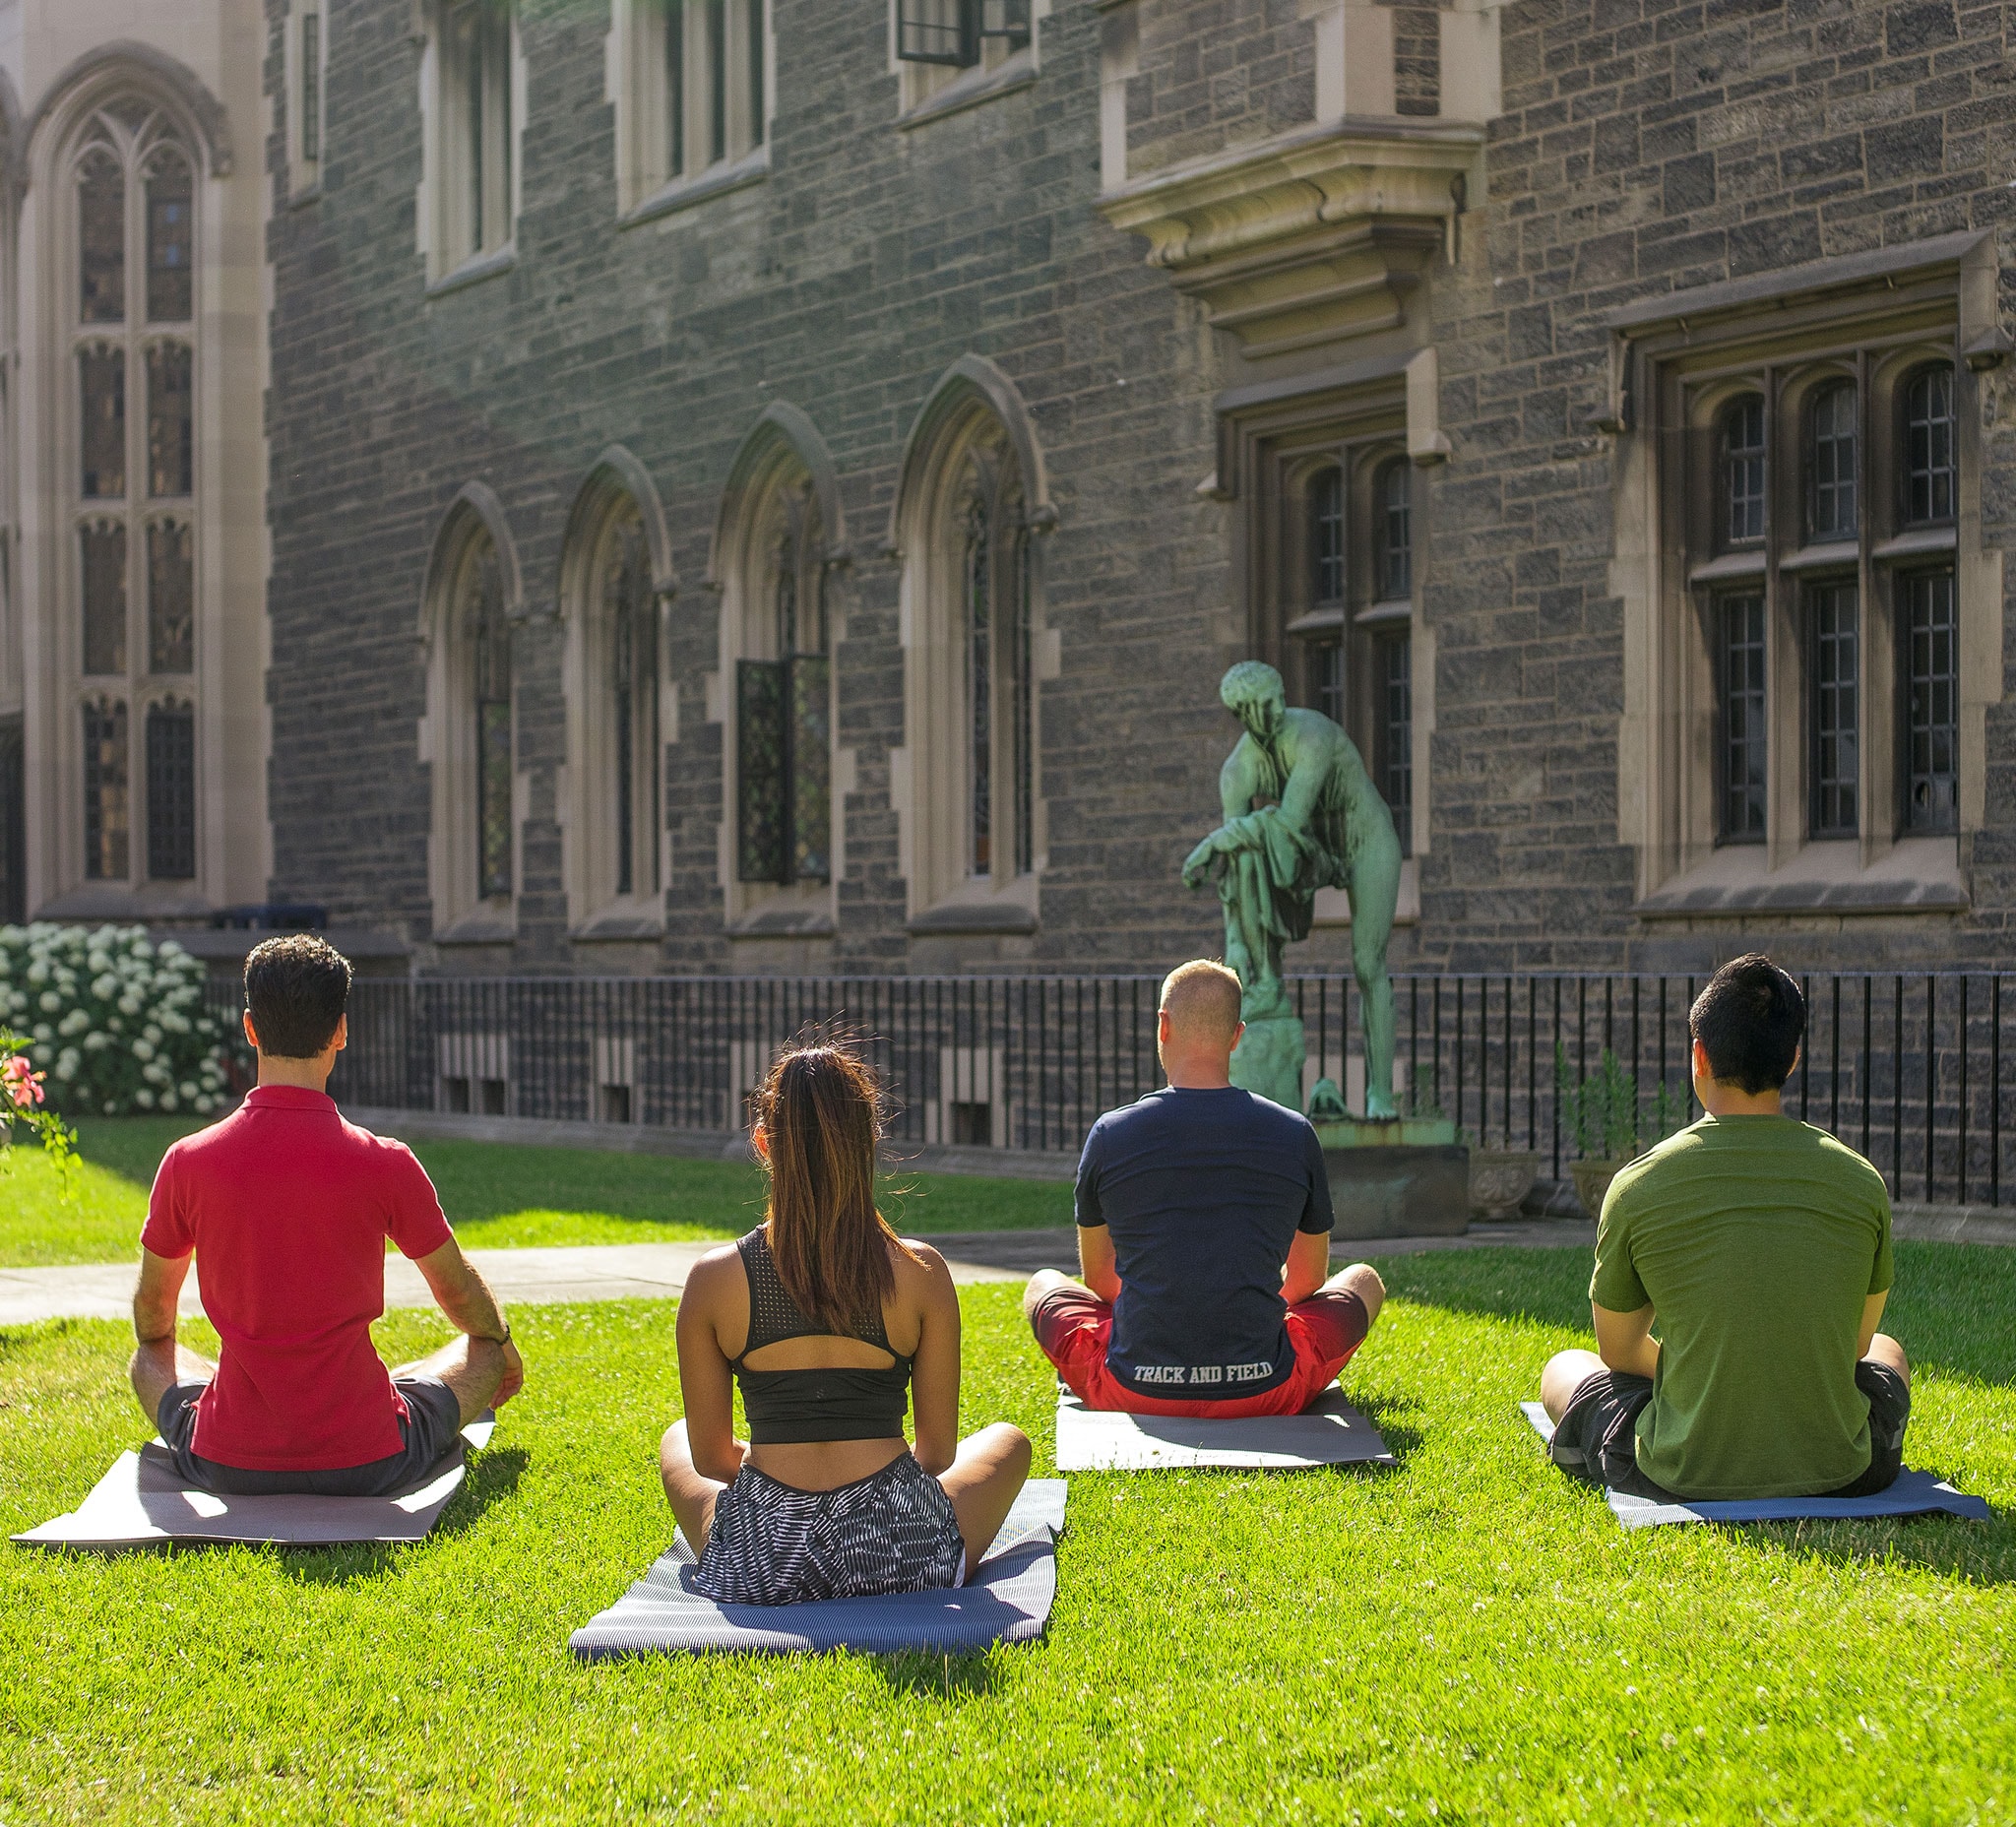 In the grassy courtyard of Hart House, on a sunny day, four people sit cross-legged on yoga mats.